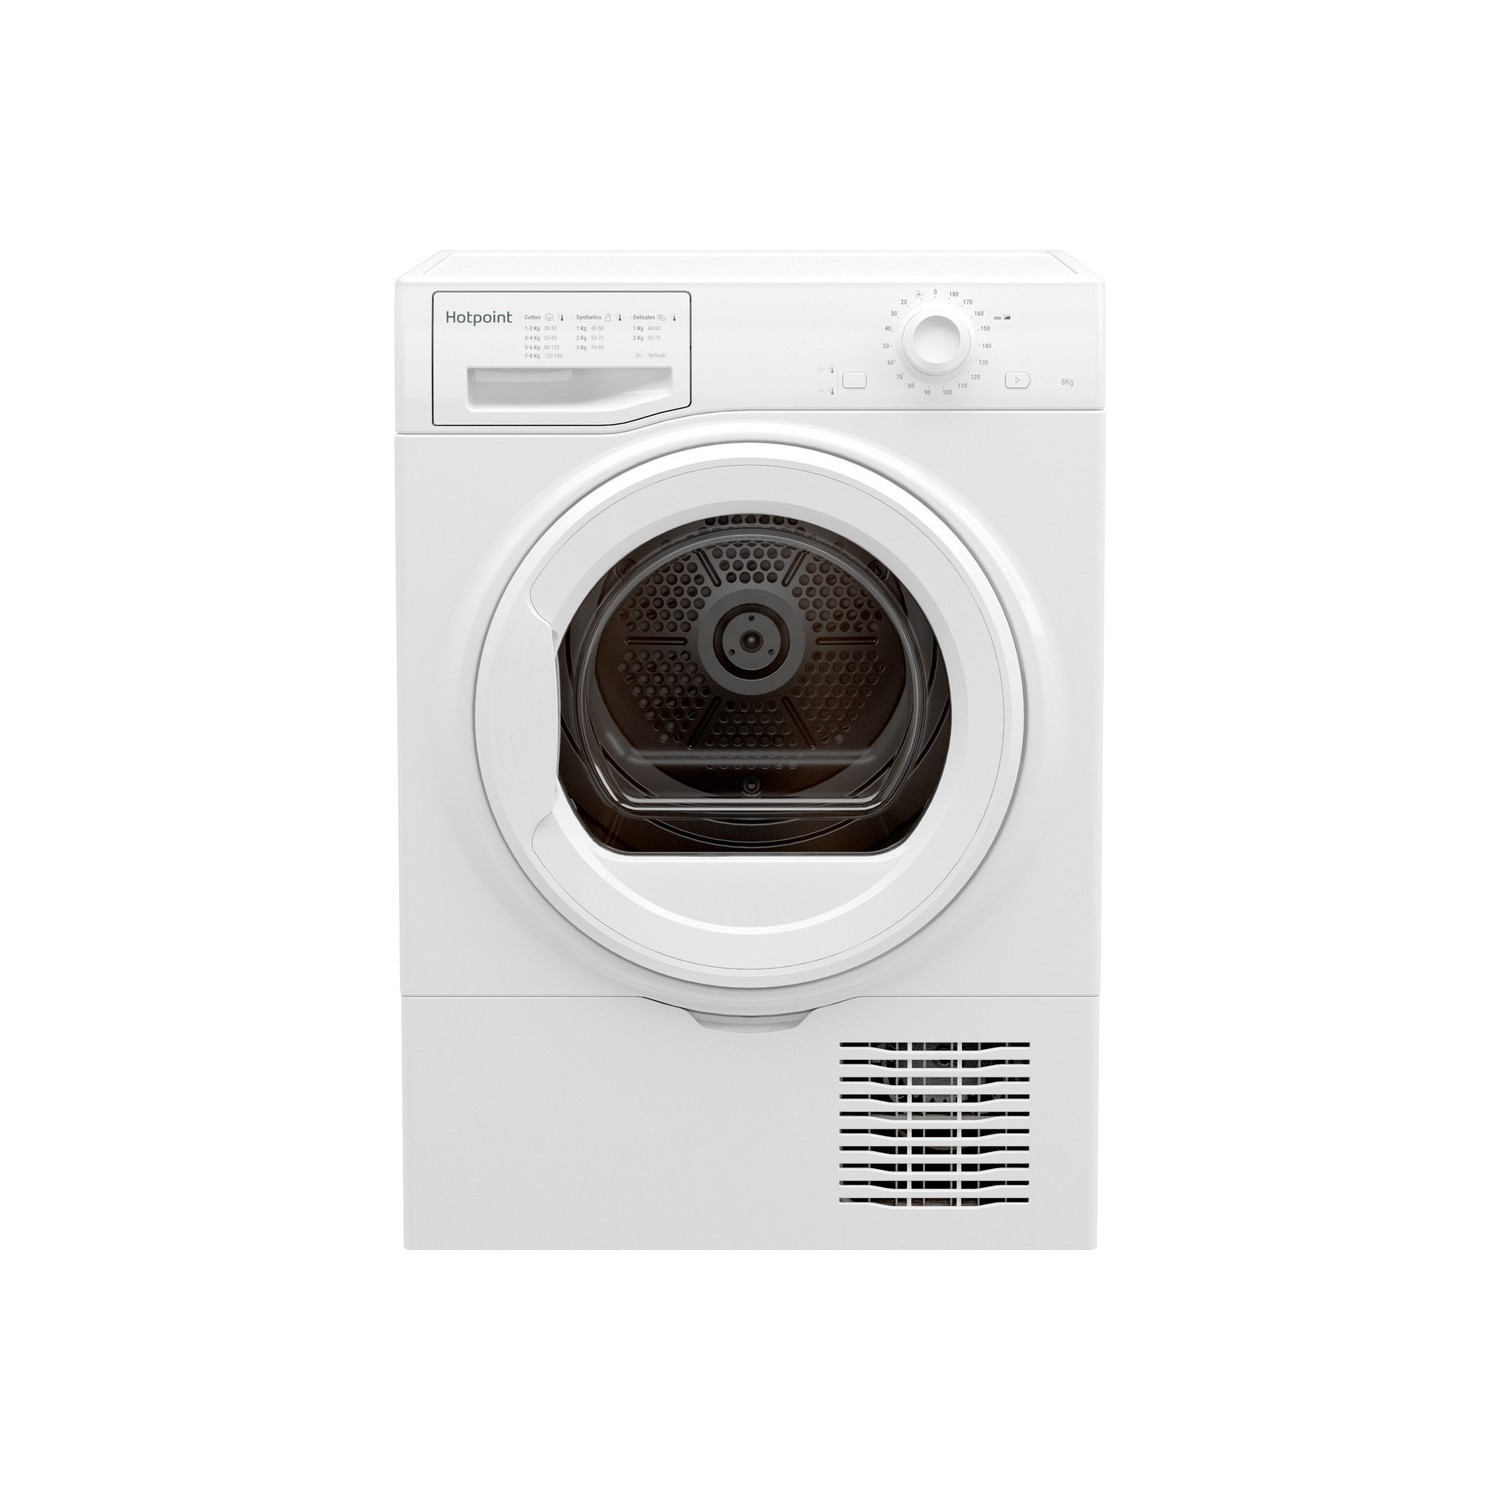 Hotpoint H2D81WUK 8Kg Condenser Tumble Dryer - White - B Rated